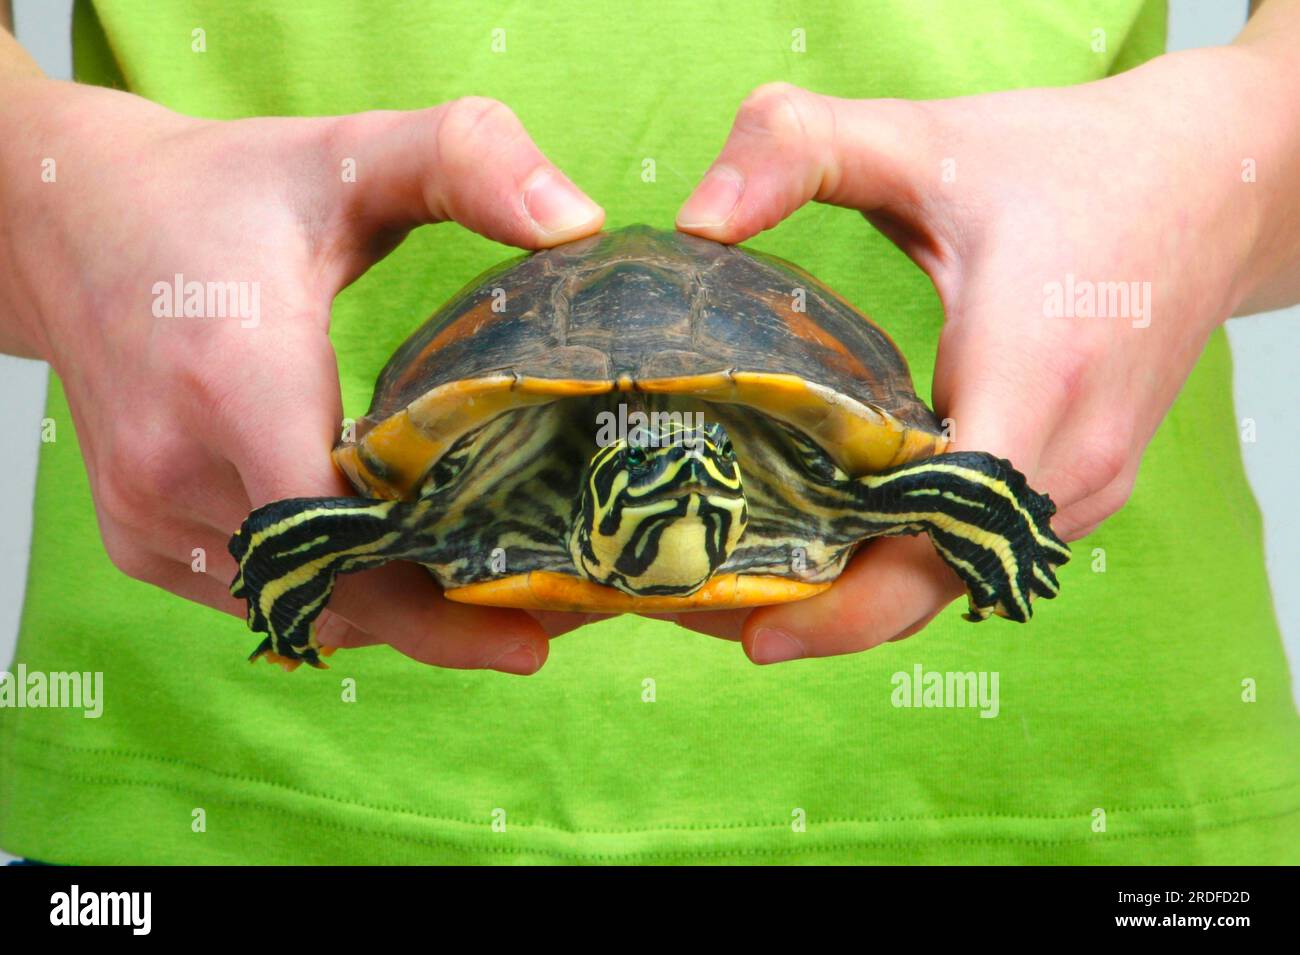 Florida Redbelly Turtle in human hands (Chrysemys nelsoni) (Pseudemys rubriventris nelsoni), Red-bellied Turtle Stock Photo